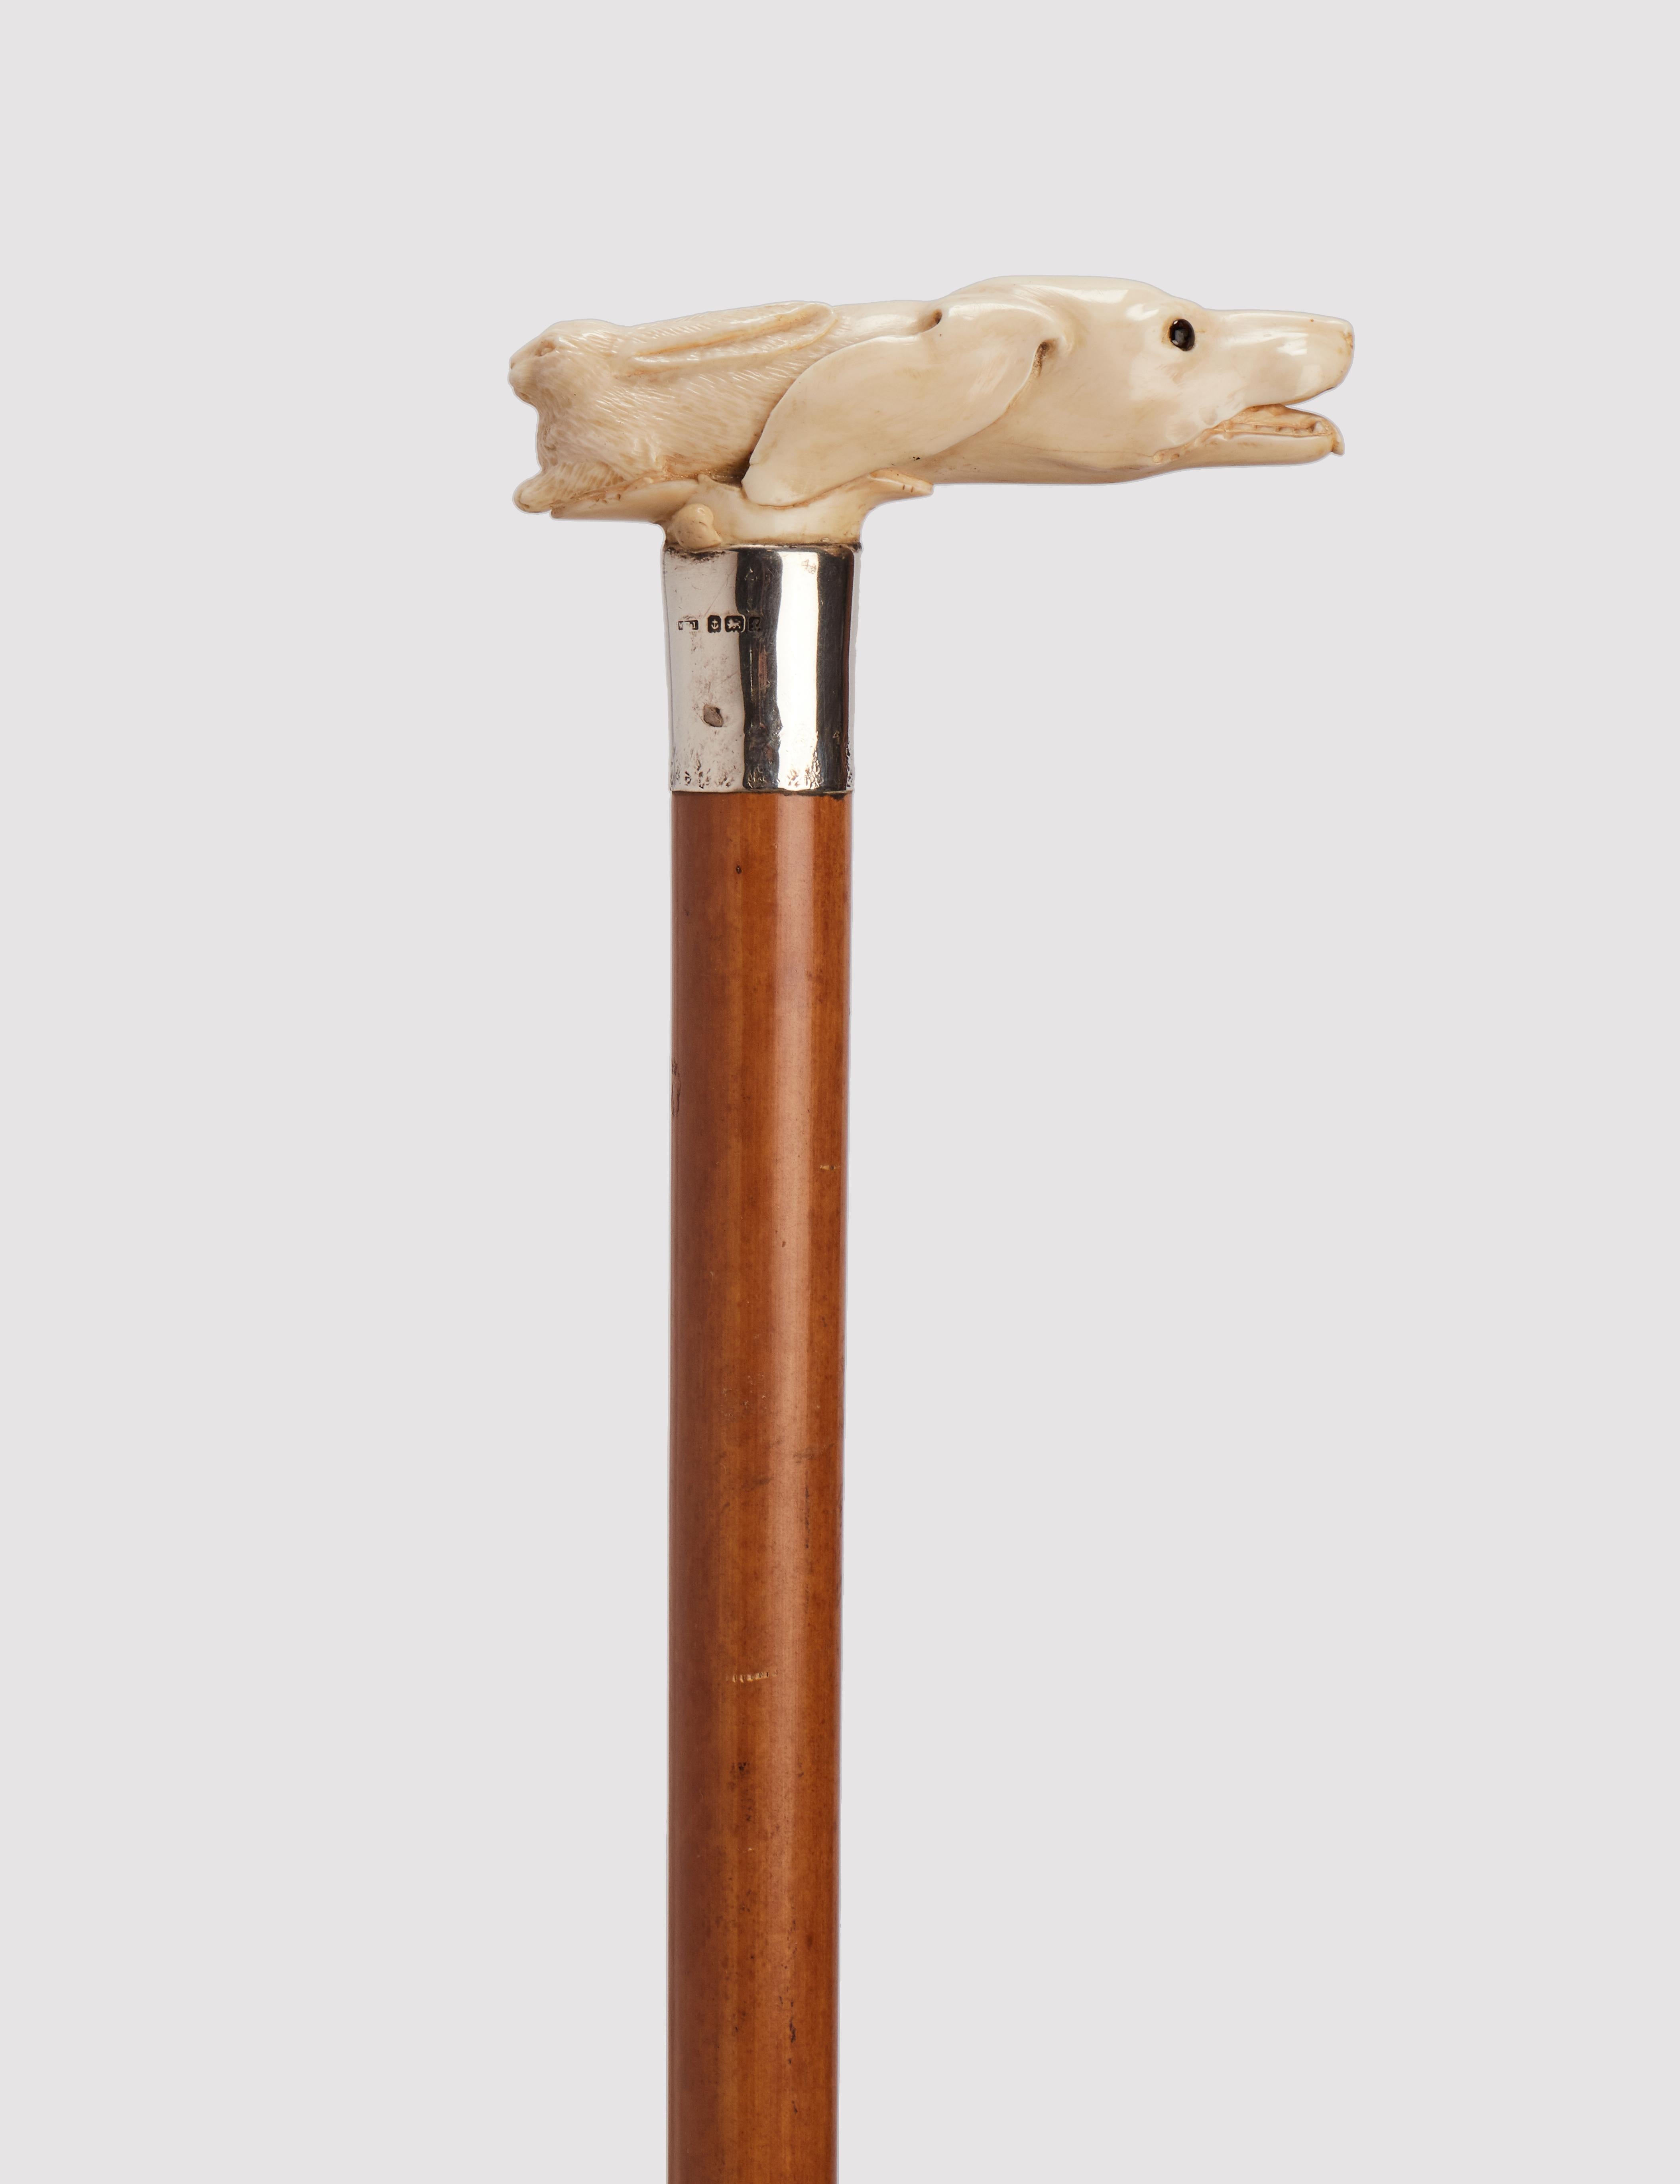 Walking stick: Ivory carved handle T shape, depicting an hunting dog head and a hare. Silver ring. Sulphur glass eyes. Malacca wood shaft. Metal ferule. UK  circa 1890. (SHIP TO EU ONLY)